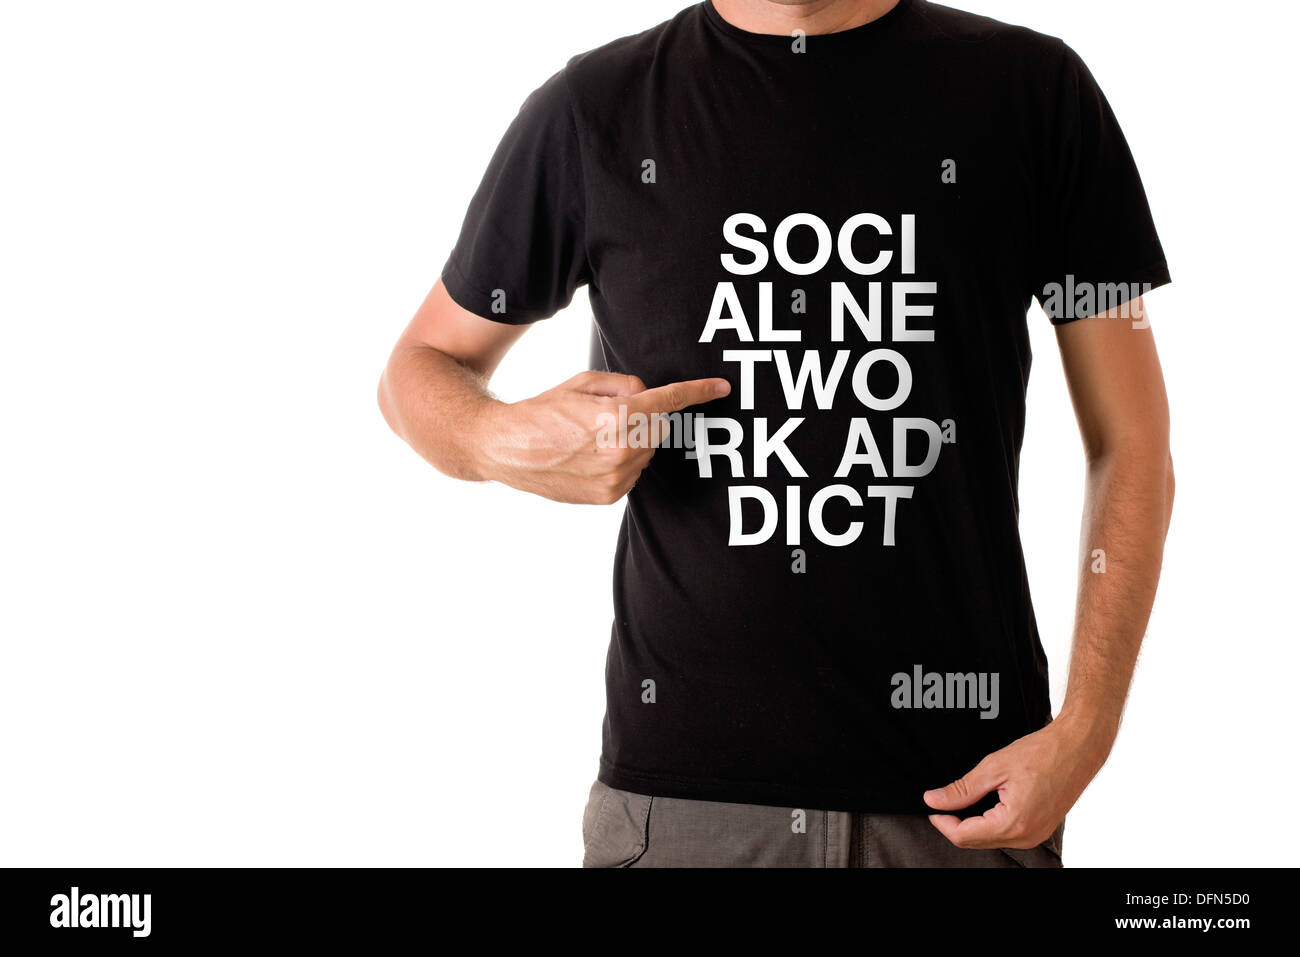 Slim tall man posing in black t-shirt with title SOCIAL NETWORK ADDICT Stock Photo